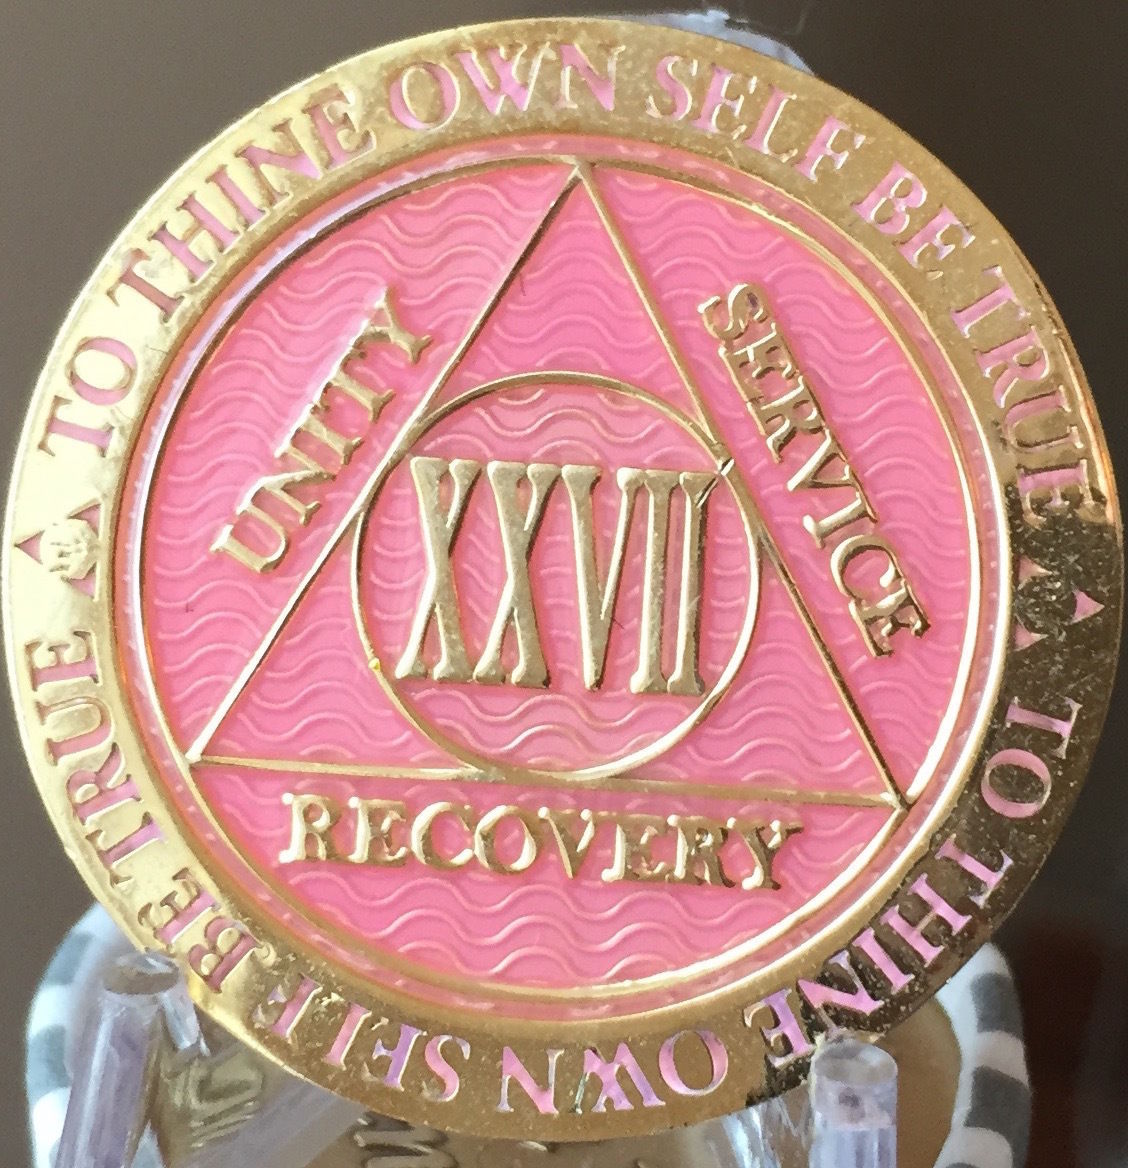 2 Month AA Medallion Reflex Pink Gold Plated Sobriety Chip Coin